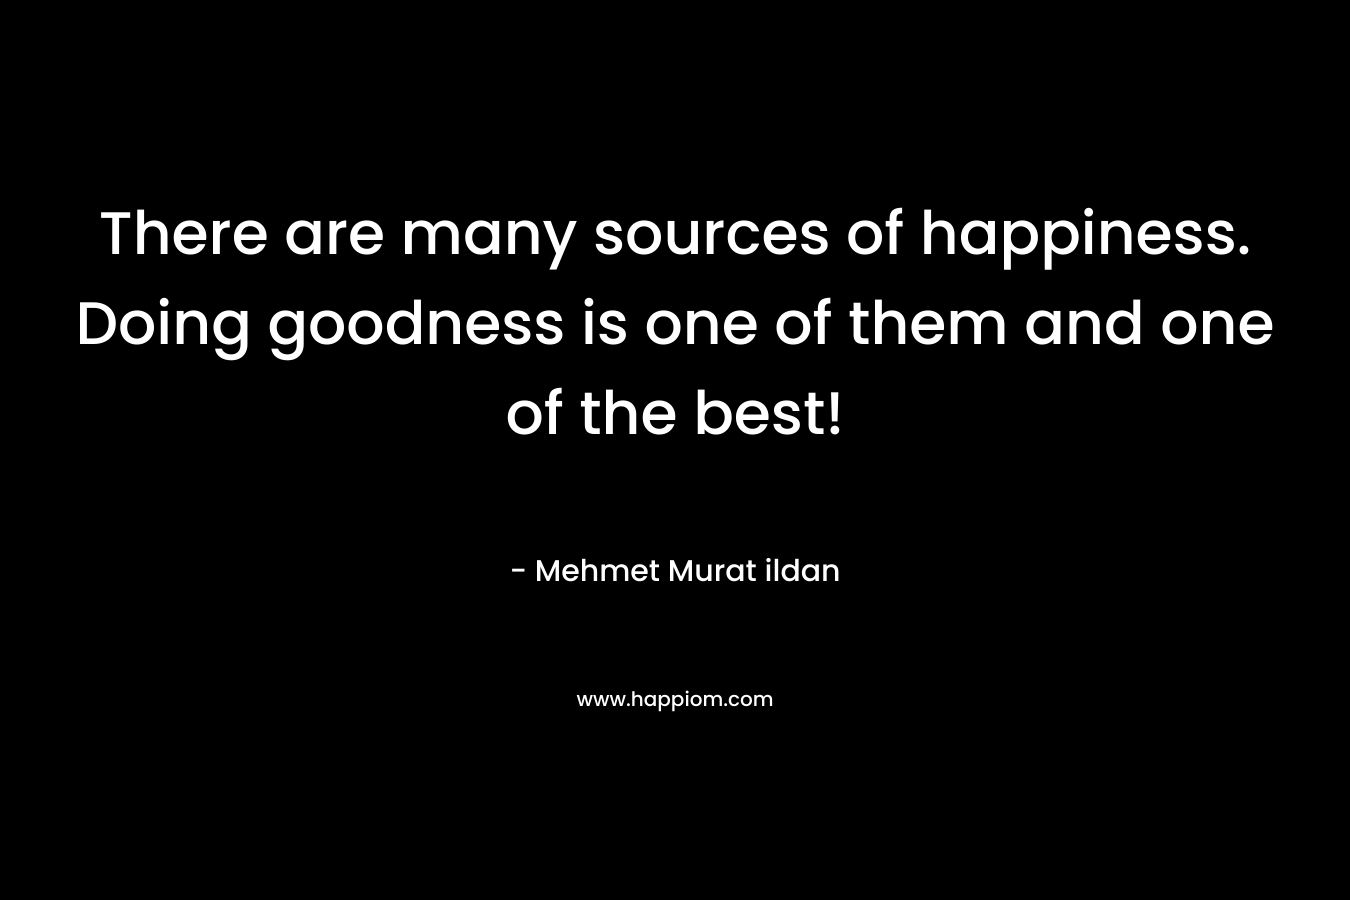 There are many sources of happiness. Doing goodness is one of them and one of the best!